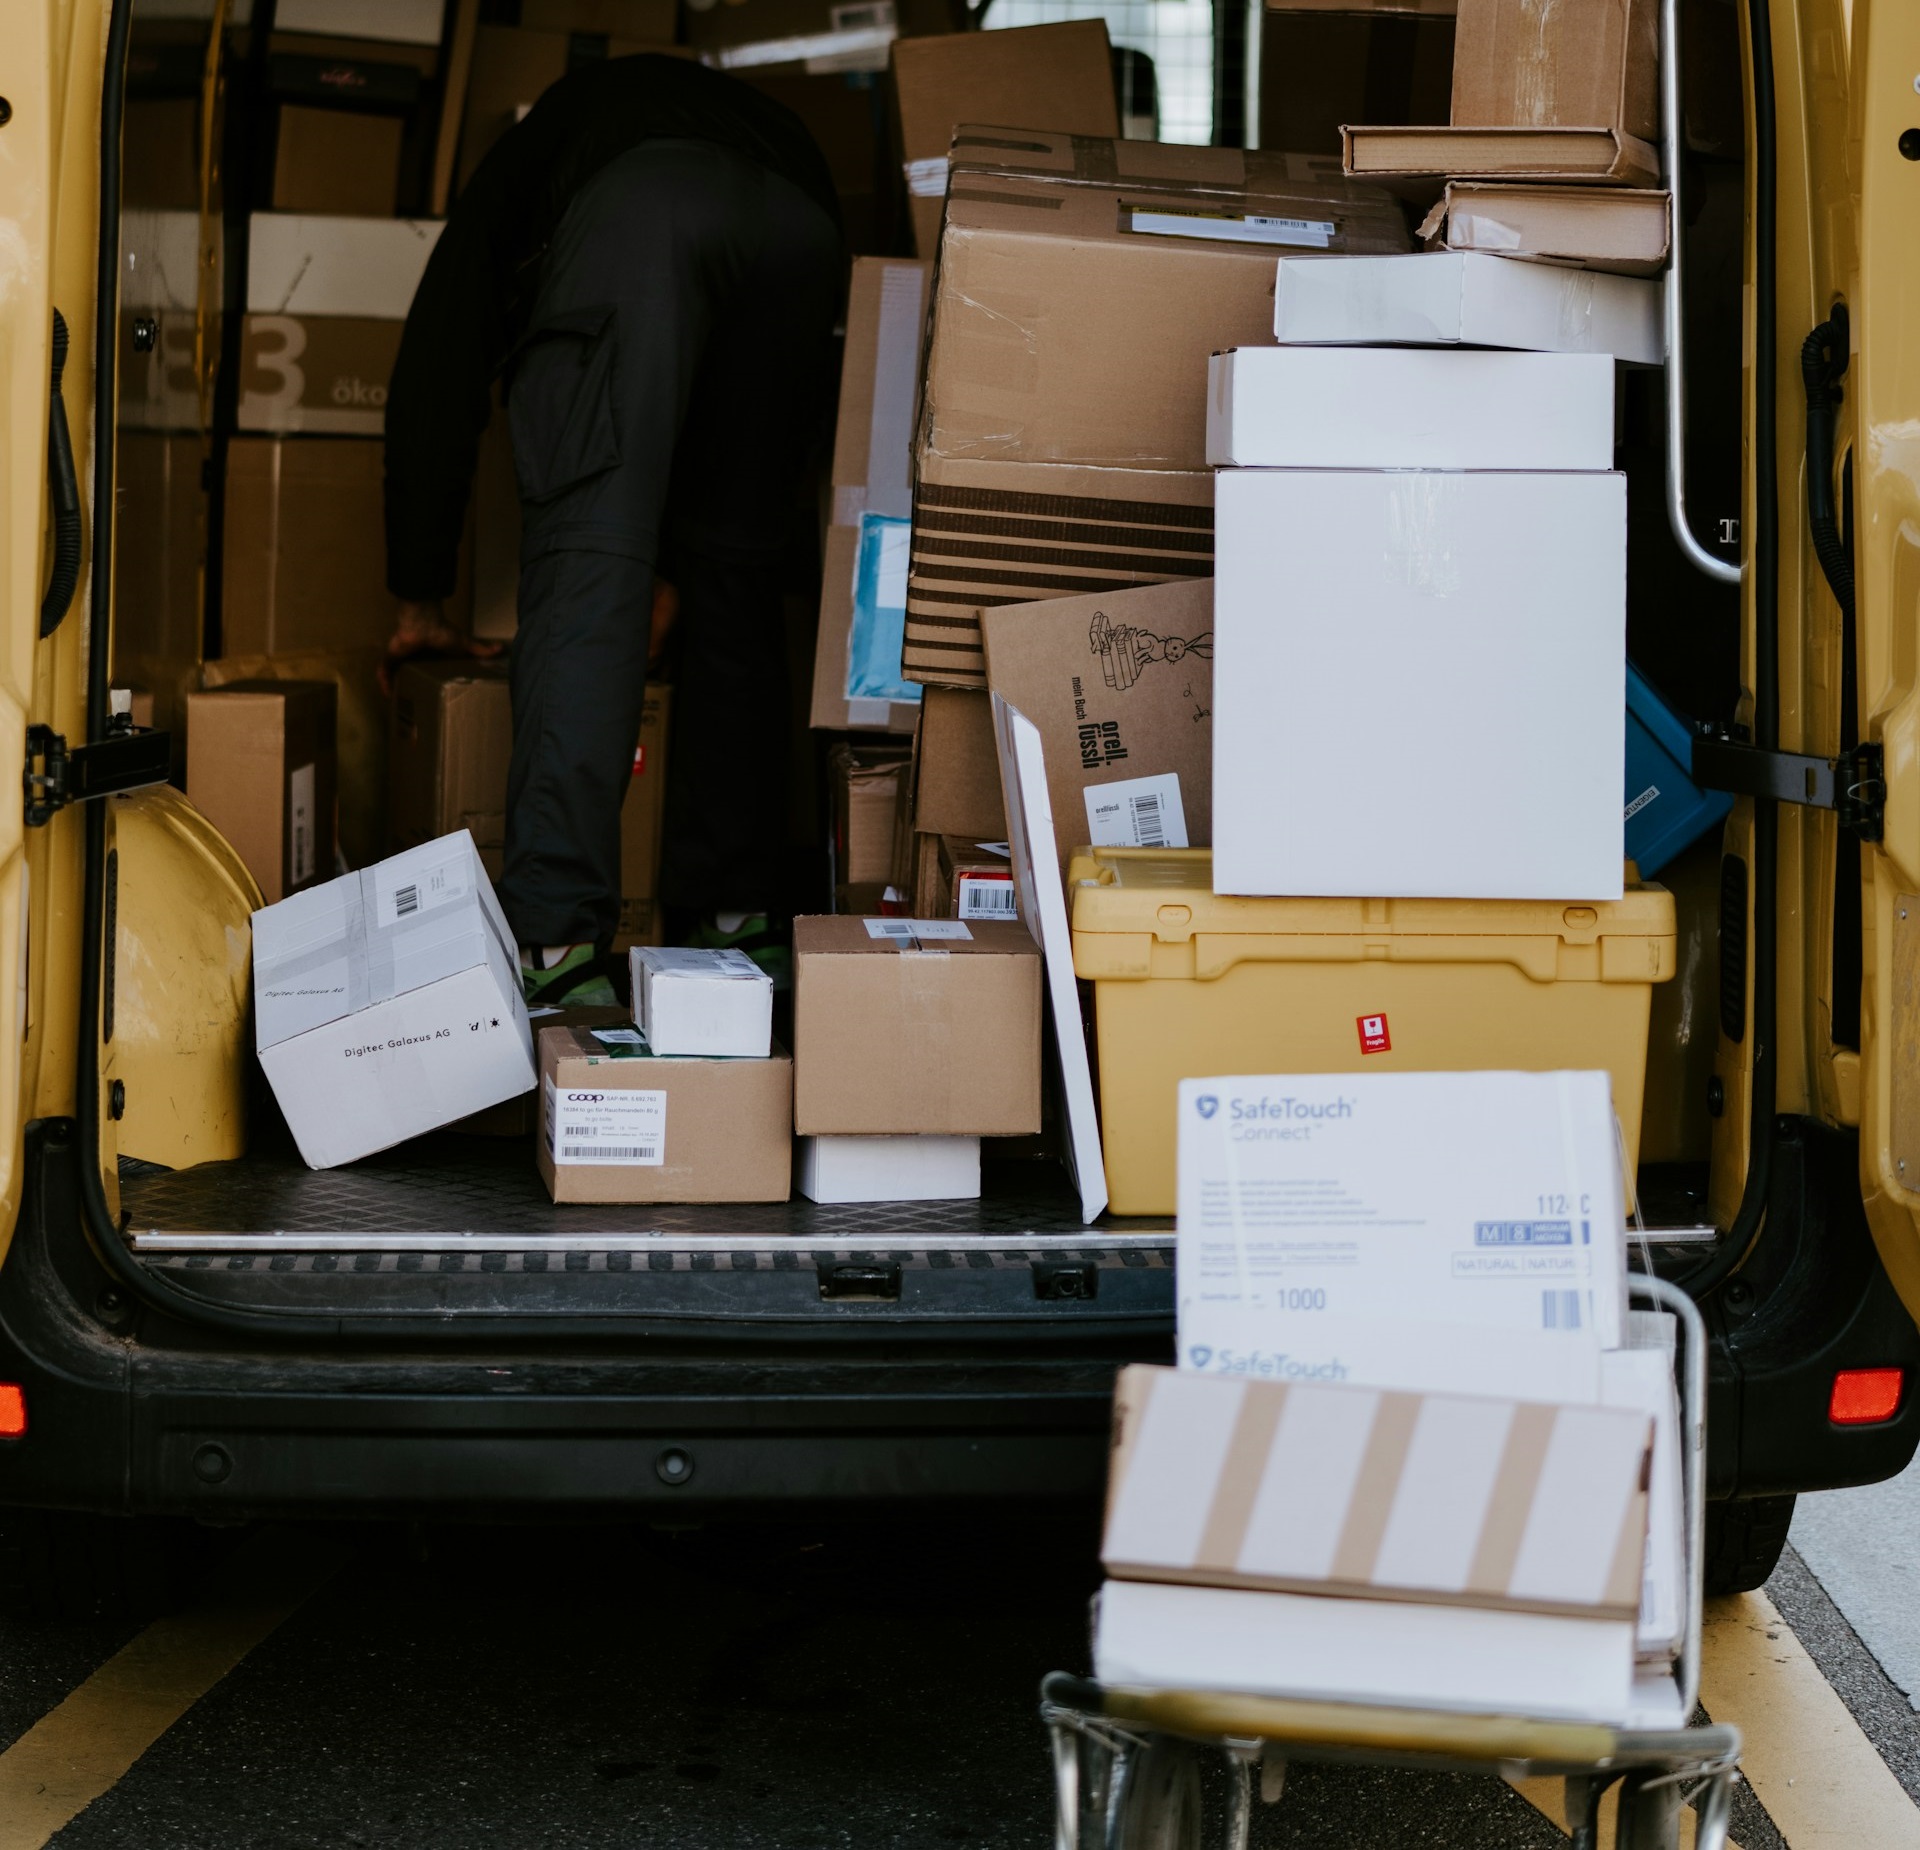 A van full of packages for Amazon seller vs vendor delivery to customers.